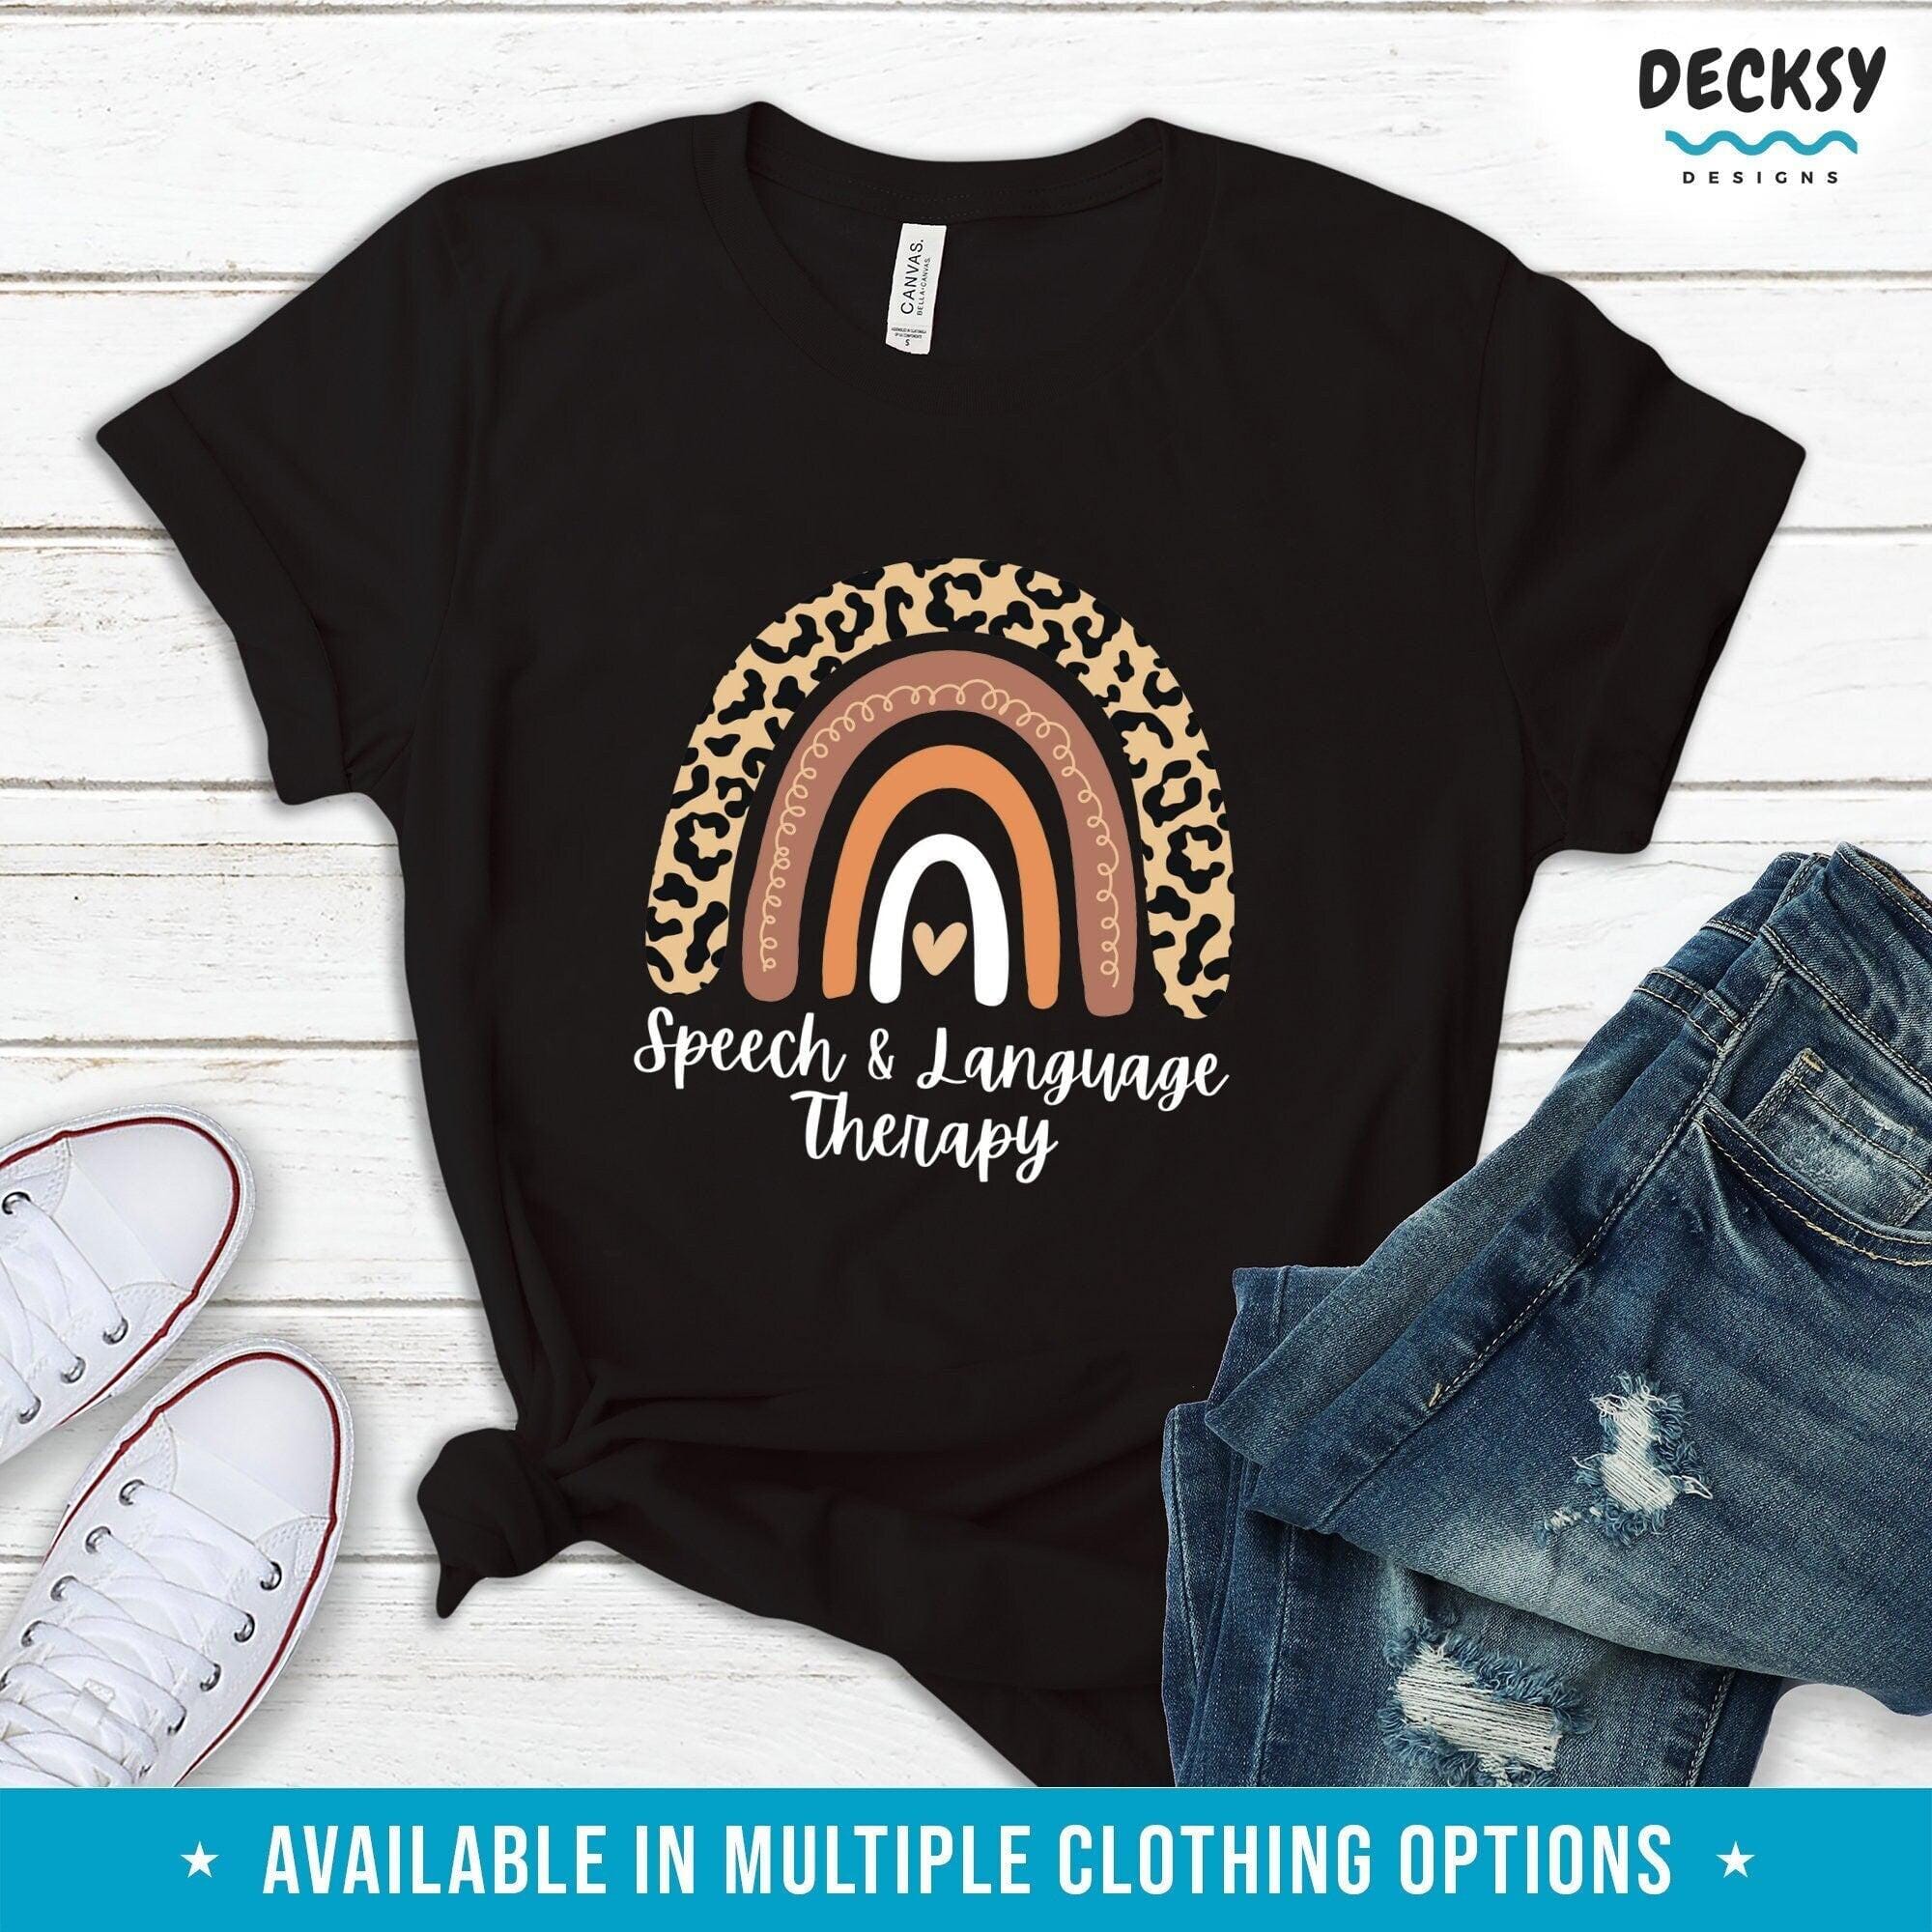 Speech Therapy Shirt, Gift For Speech And Language Therapist-Clothing:Gender-Neutral Adult Clothing:Tops & Tees:T-shirts:Graphic Tees-DecksyDesigns